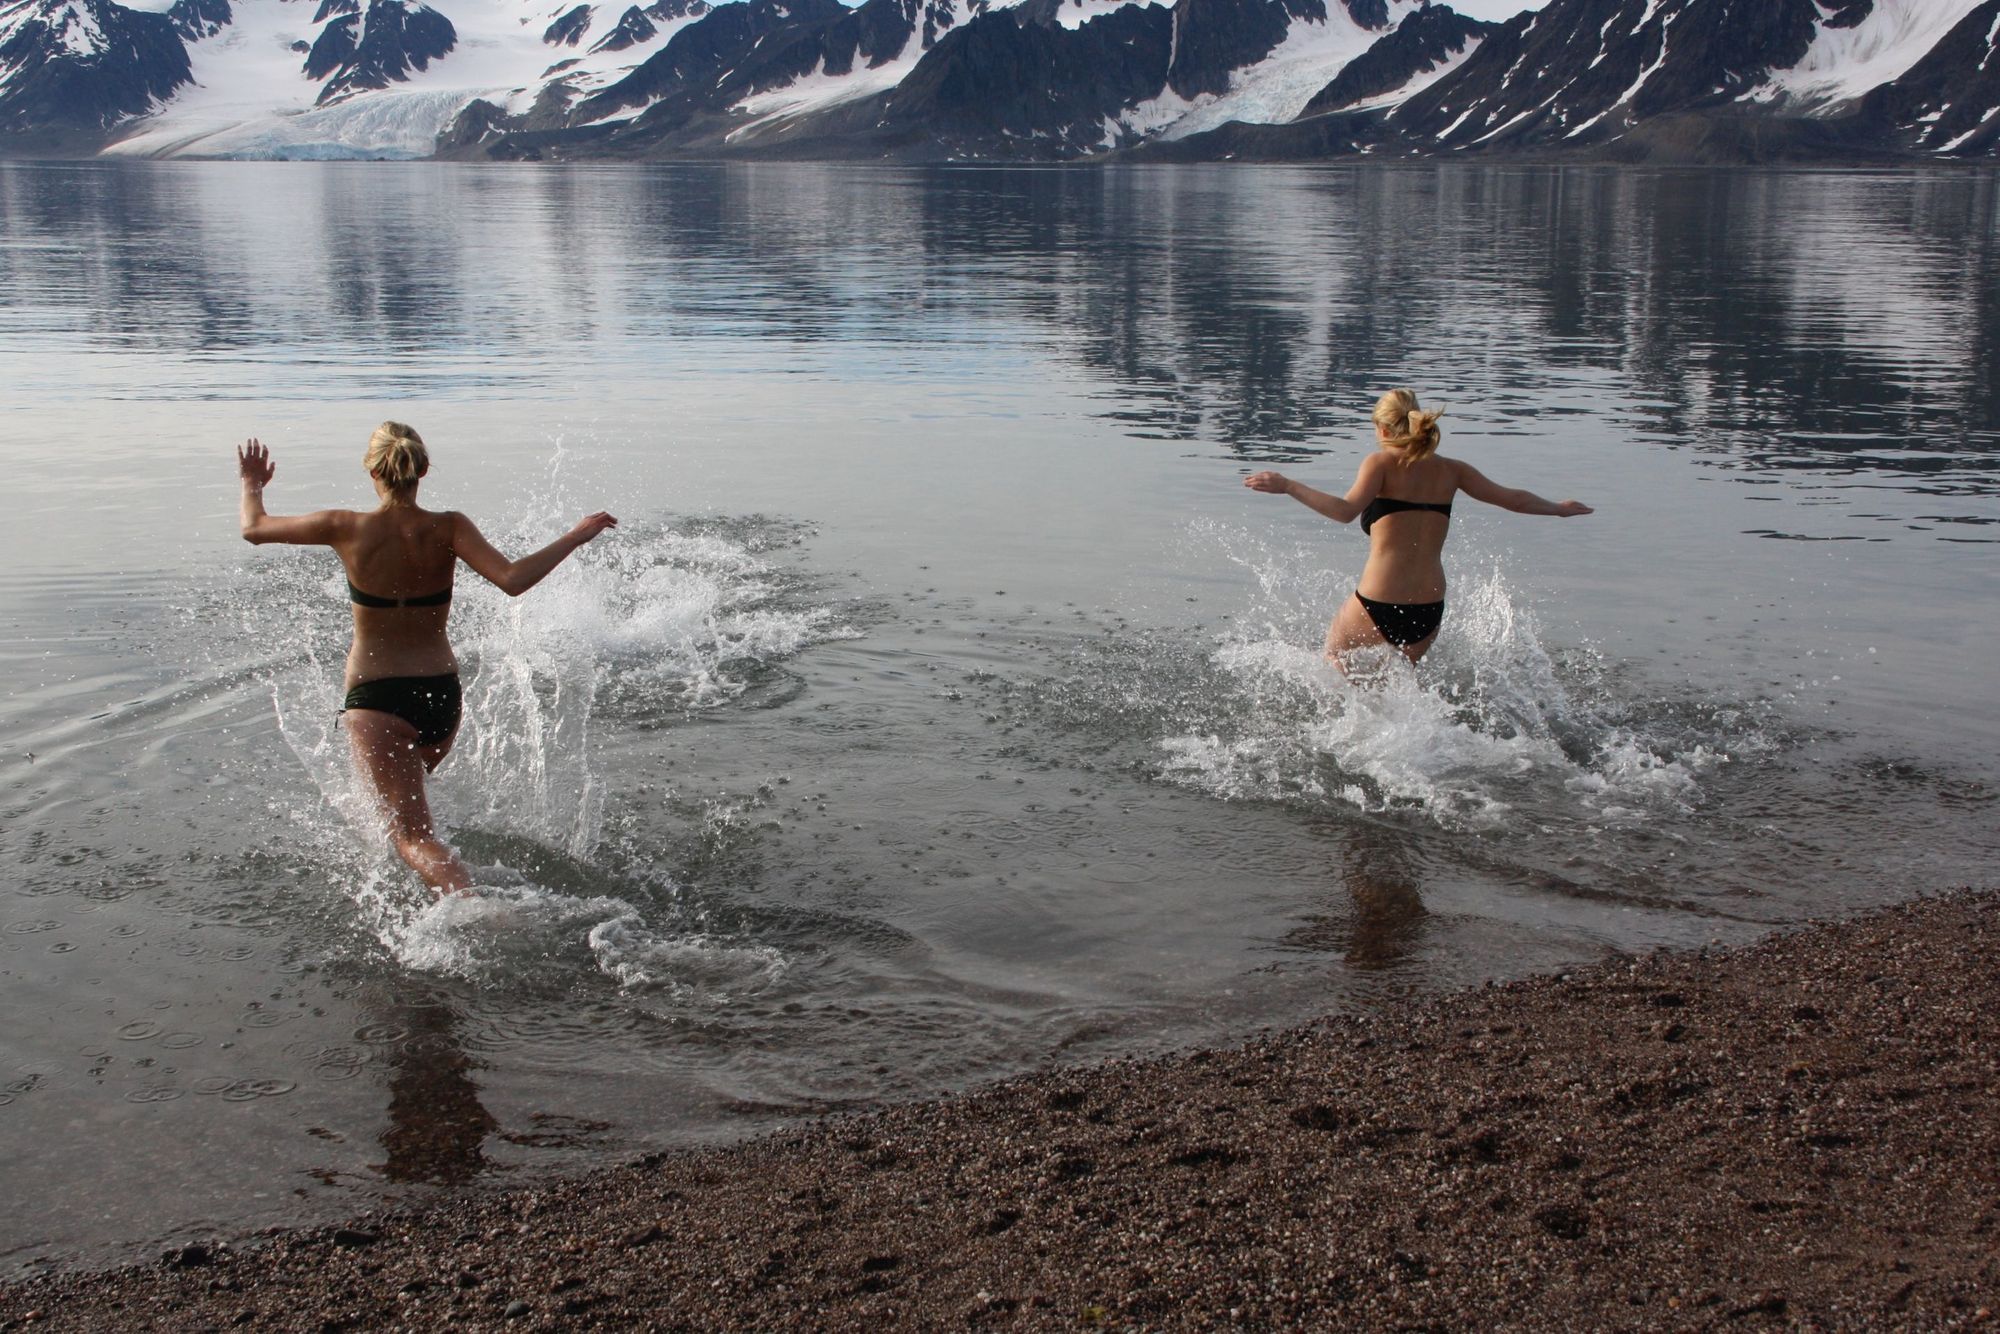 Two women going for a swim in a fjord on Svalbard